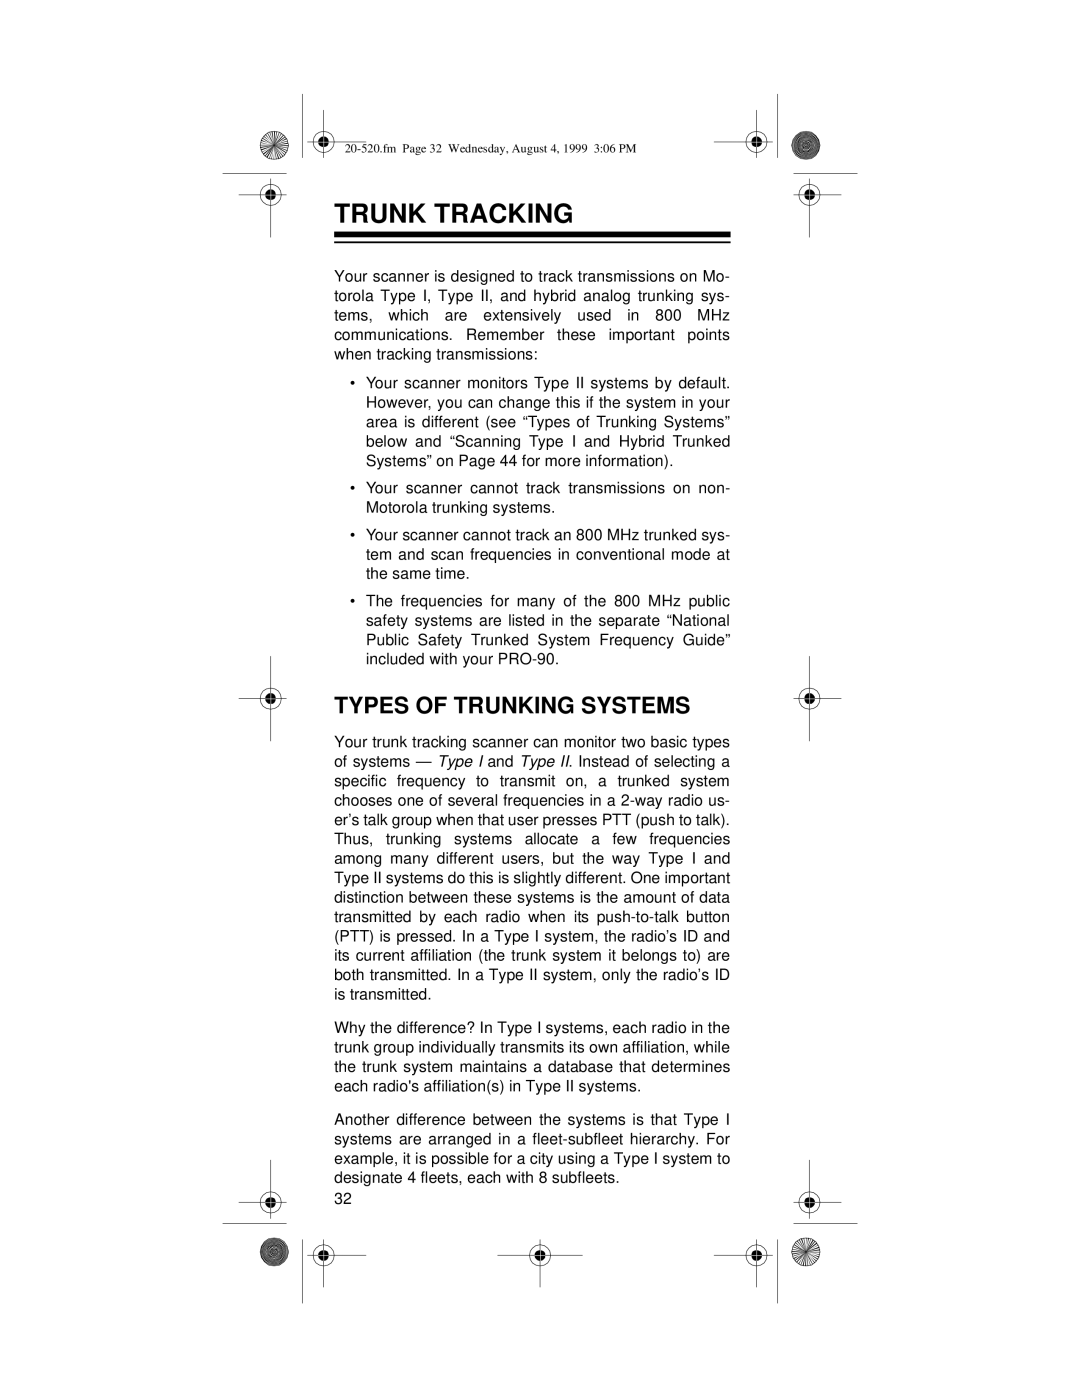 Radio Shack PRO-90 owner manual Trunk Tracking, Types Of Trunking Systems 